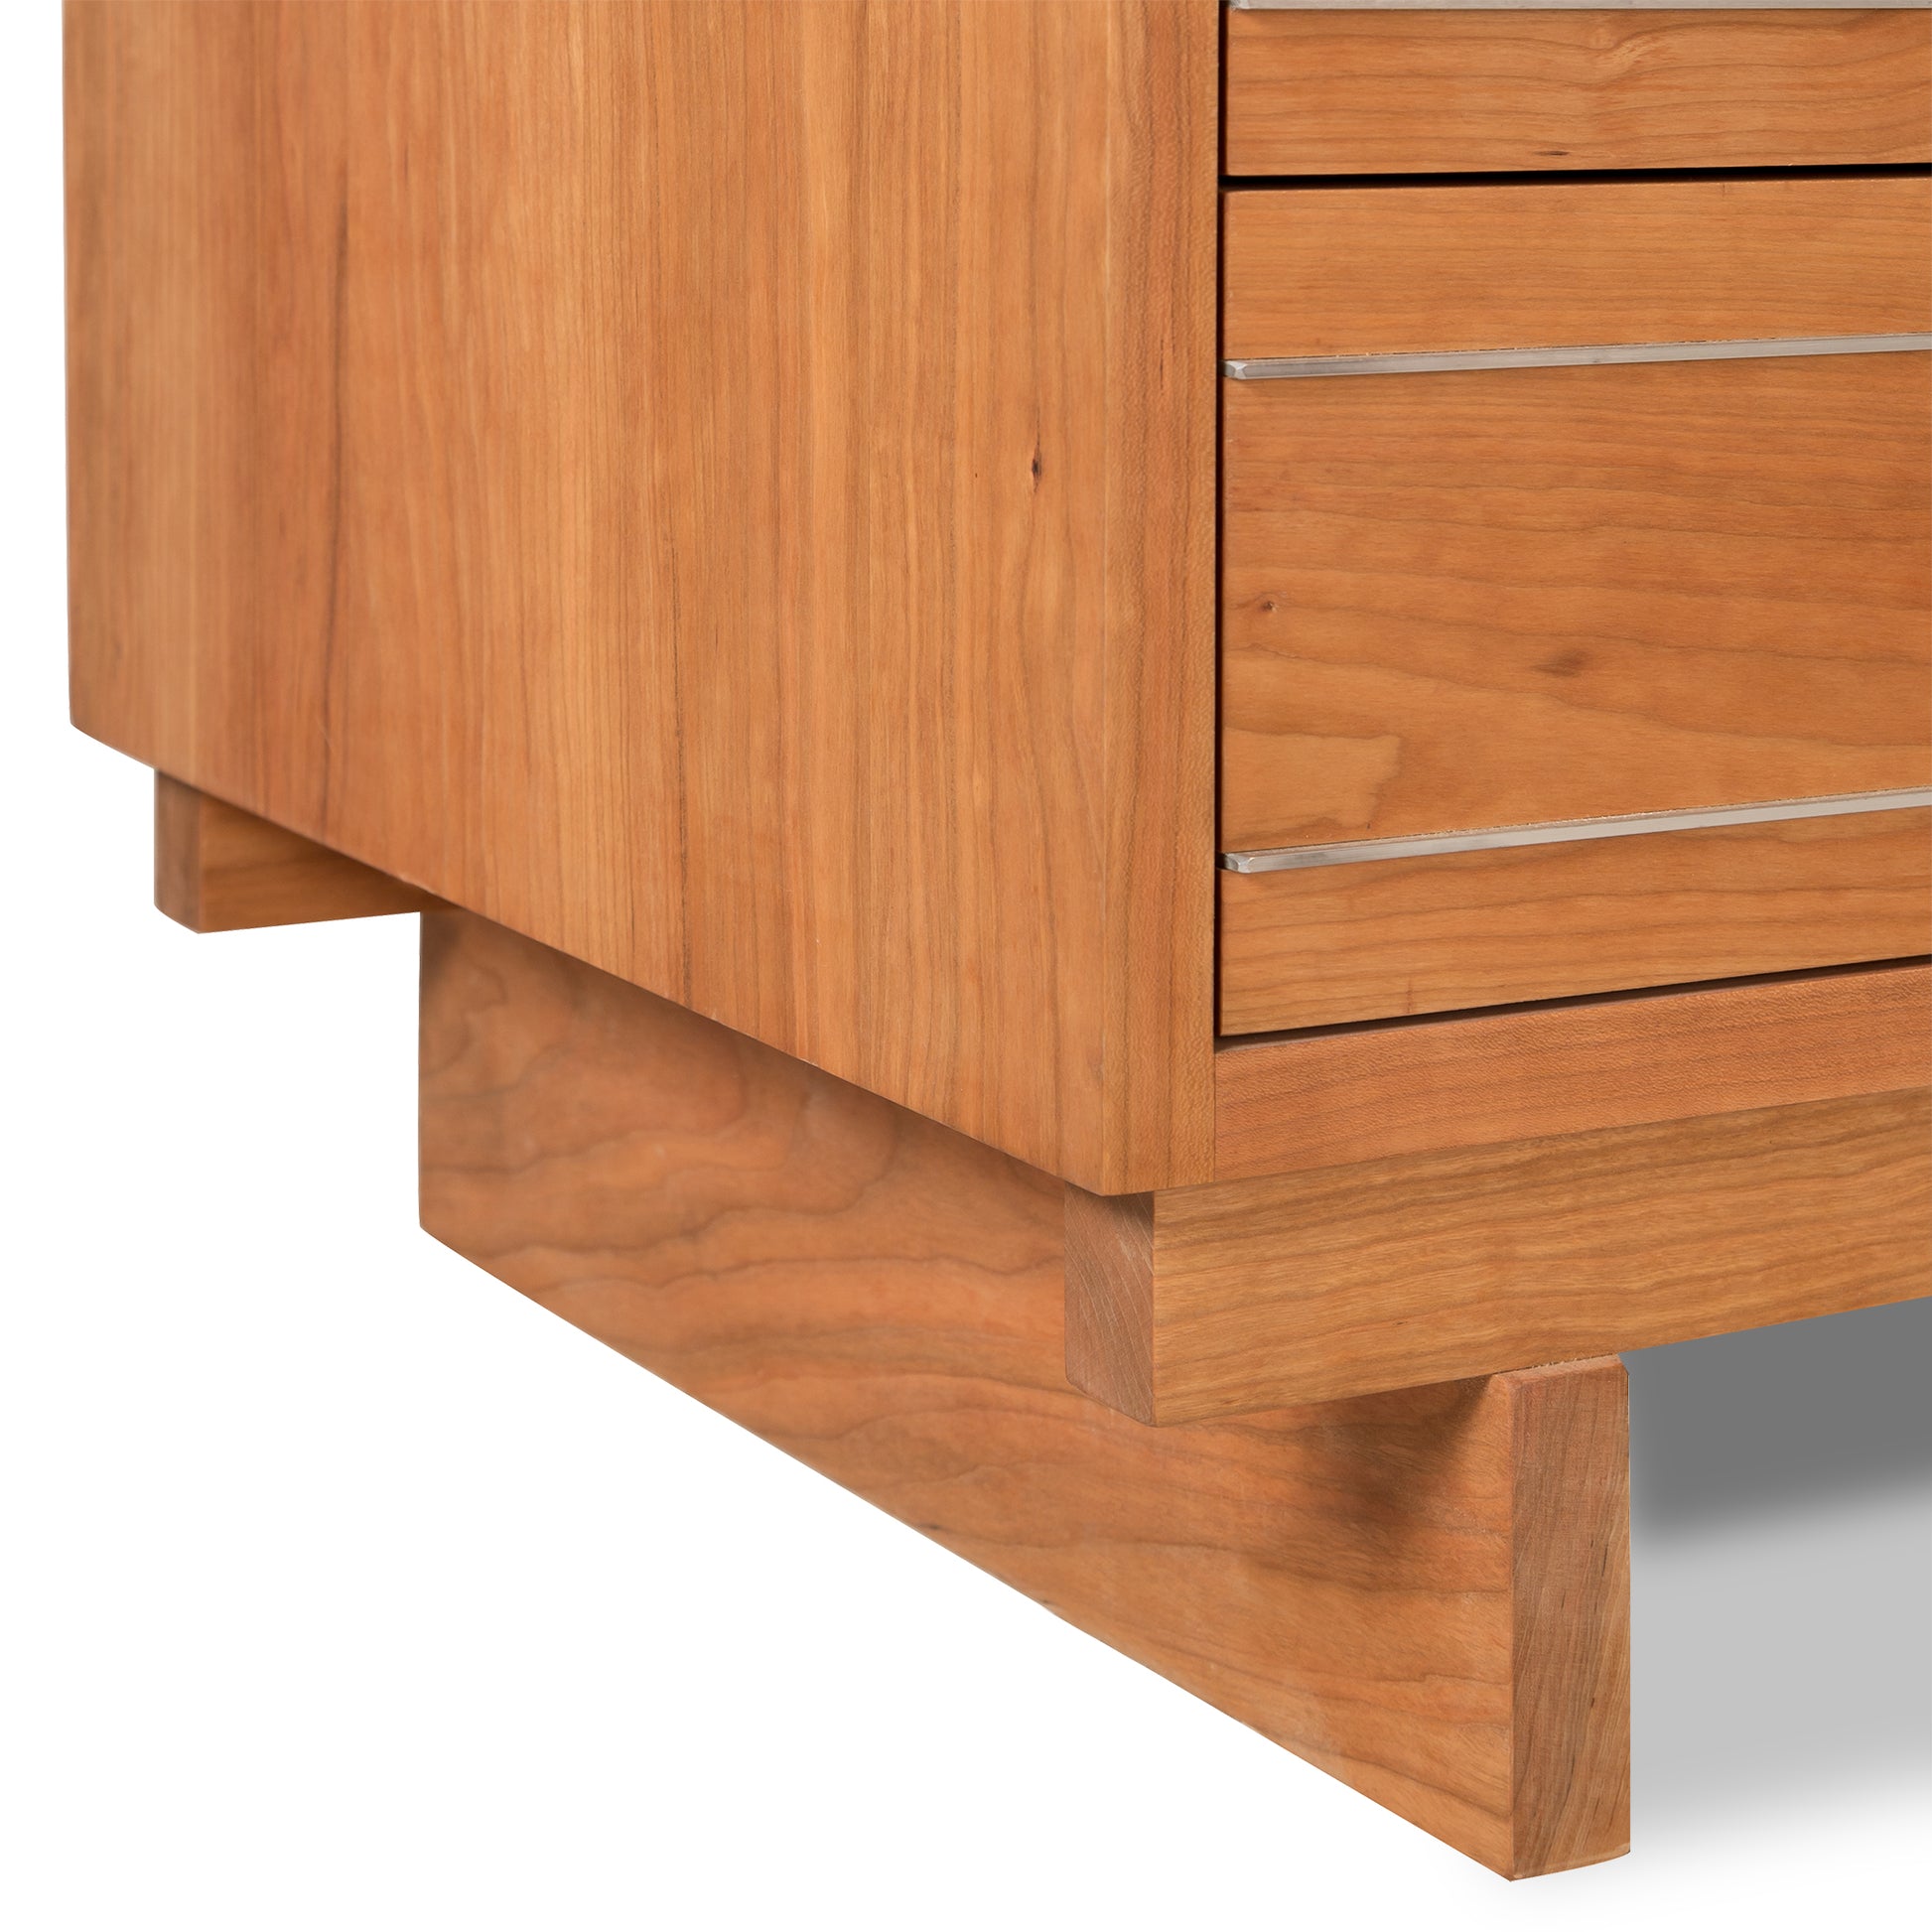 A Contemporary Cable 3-Drawer Chest, handcrafted in Vermont by Vermont Furniture Designs, with a simple, modern design, showing a partial view focused on the corner with drawers and a sturdy base.